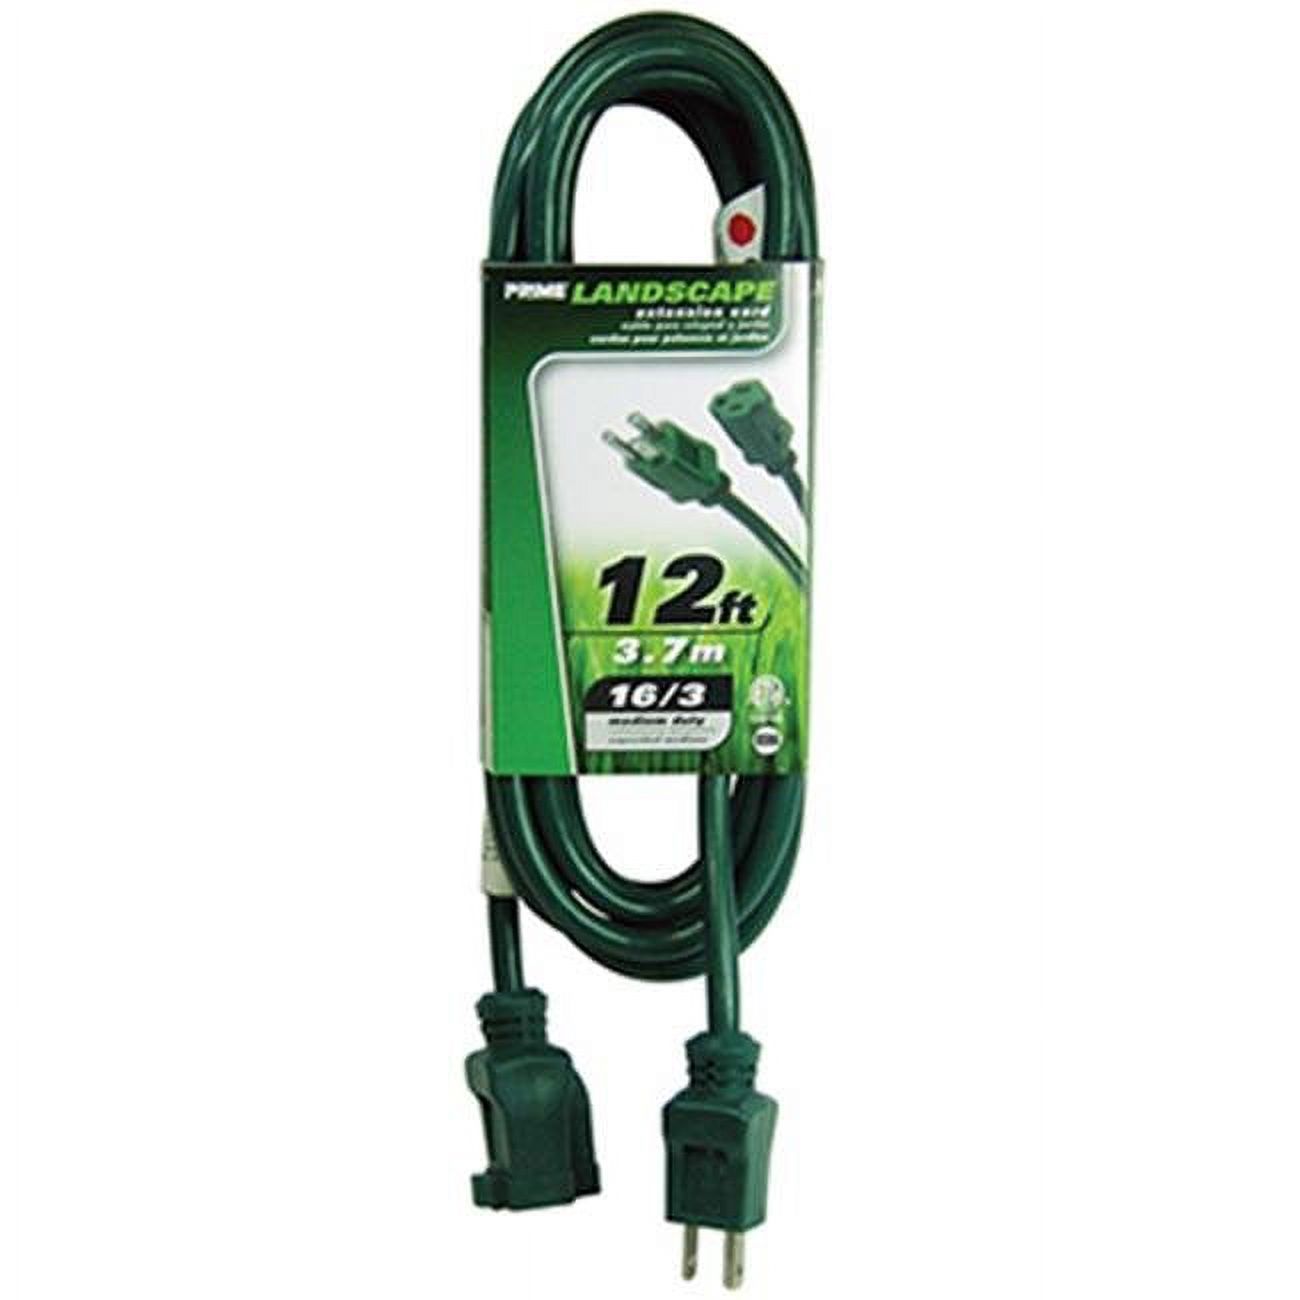 Prime EC880612 Green Extension Cord- 12 ft. - image 1 of 2